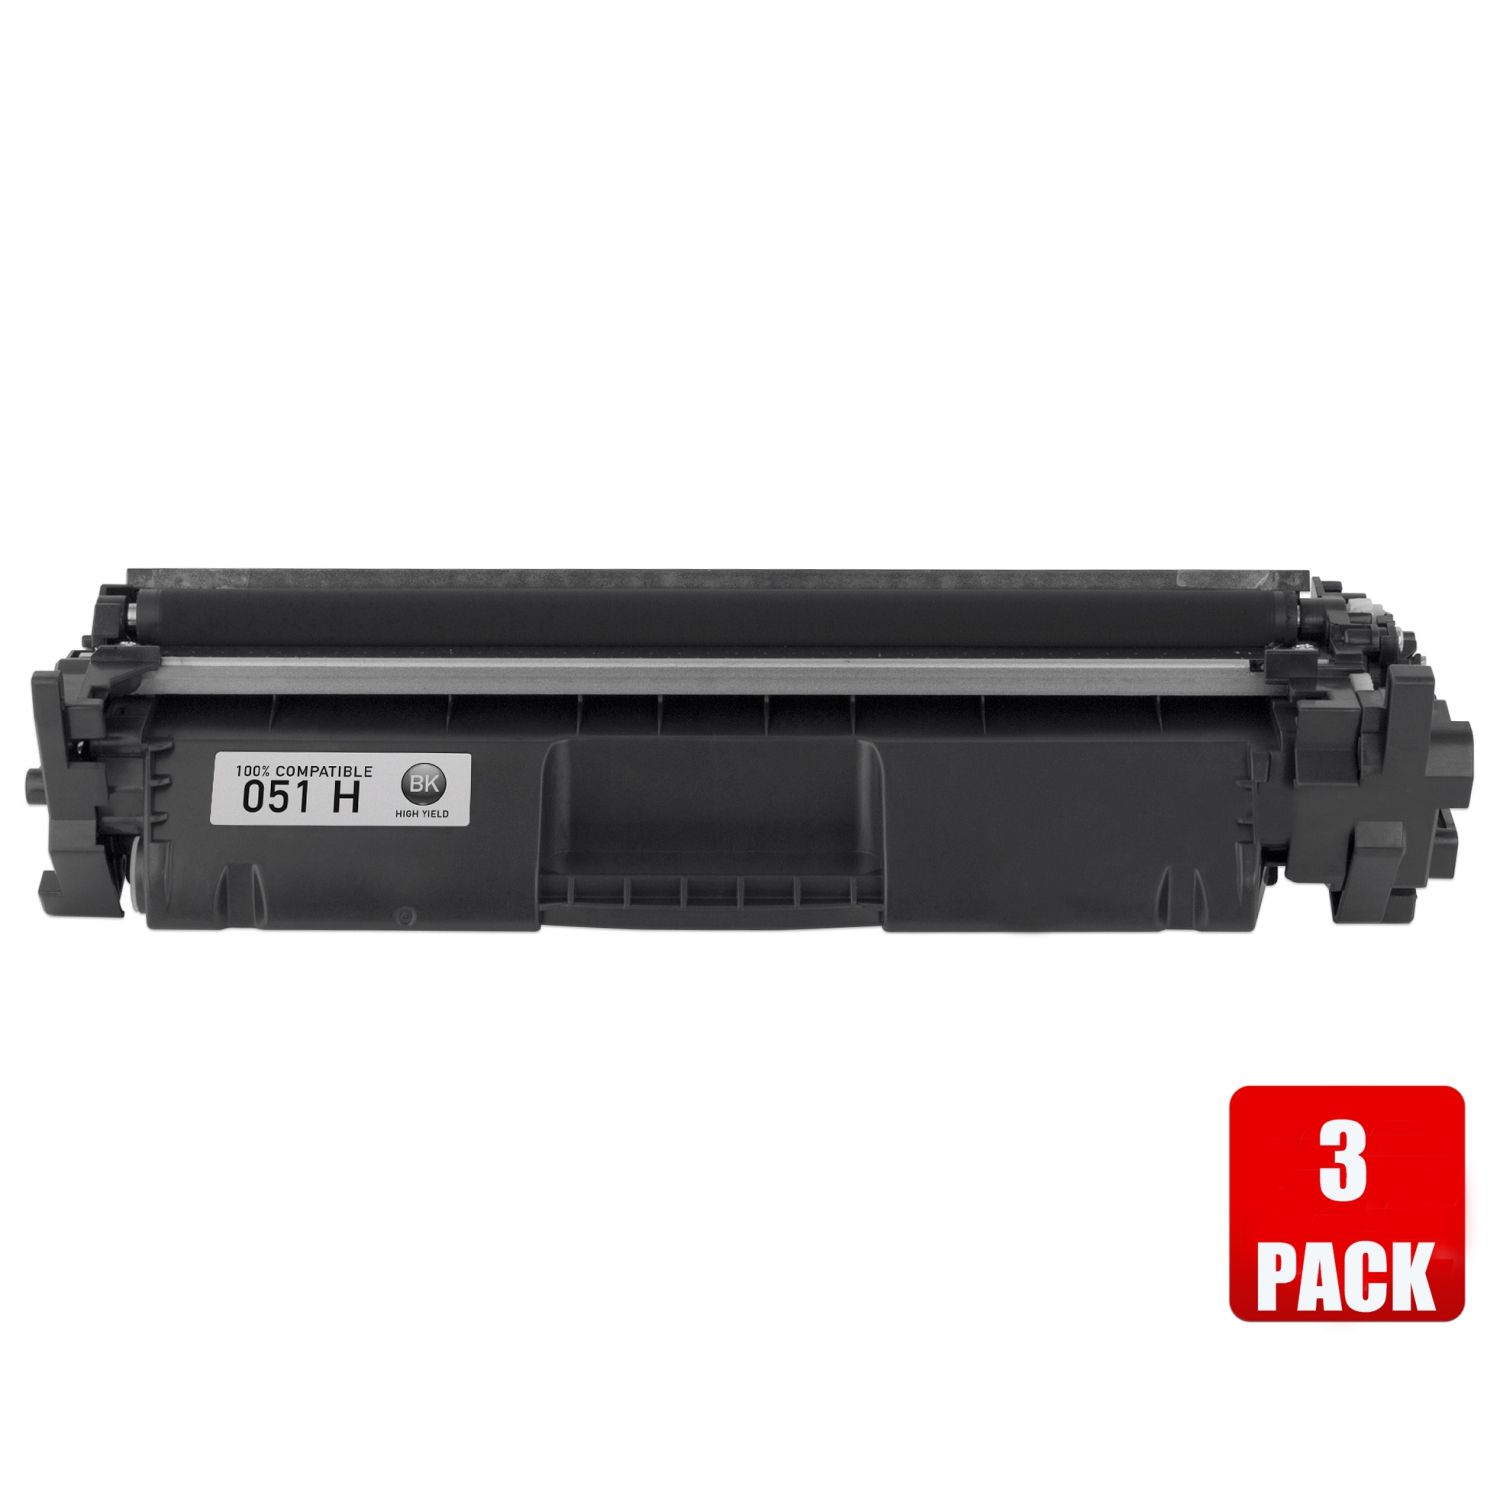 Prime 3 Pack Canon 051H/Canon-051H/051/051H High Yield Black Compatible Toner Cartridge # FREE SHIPPING